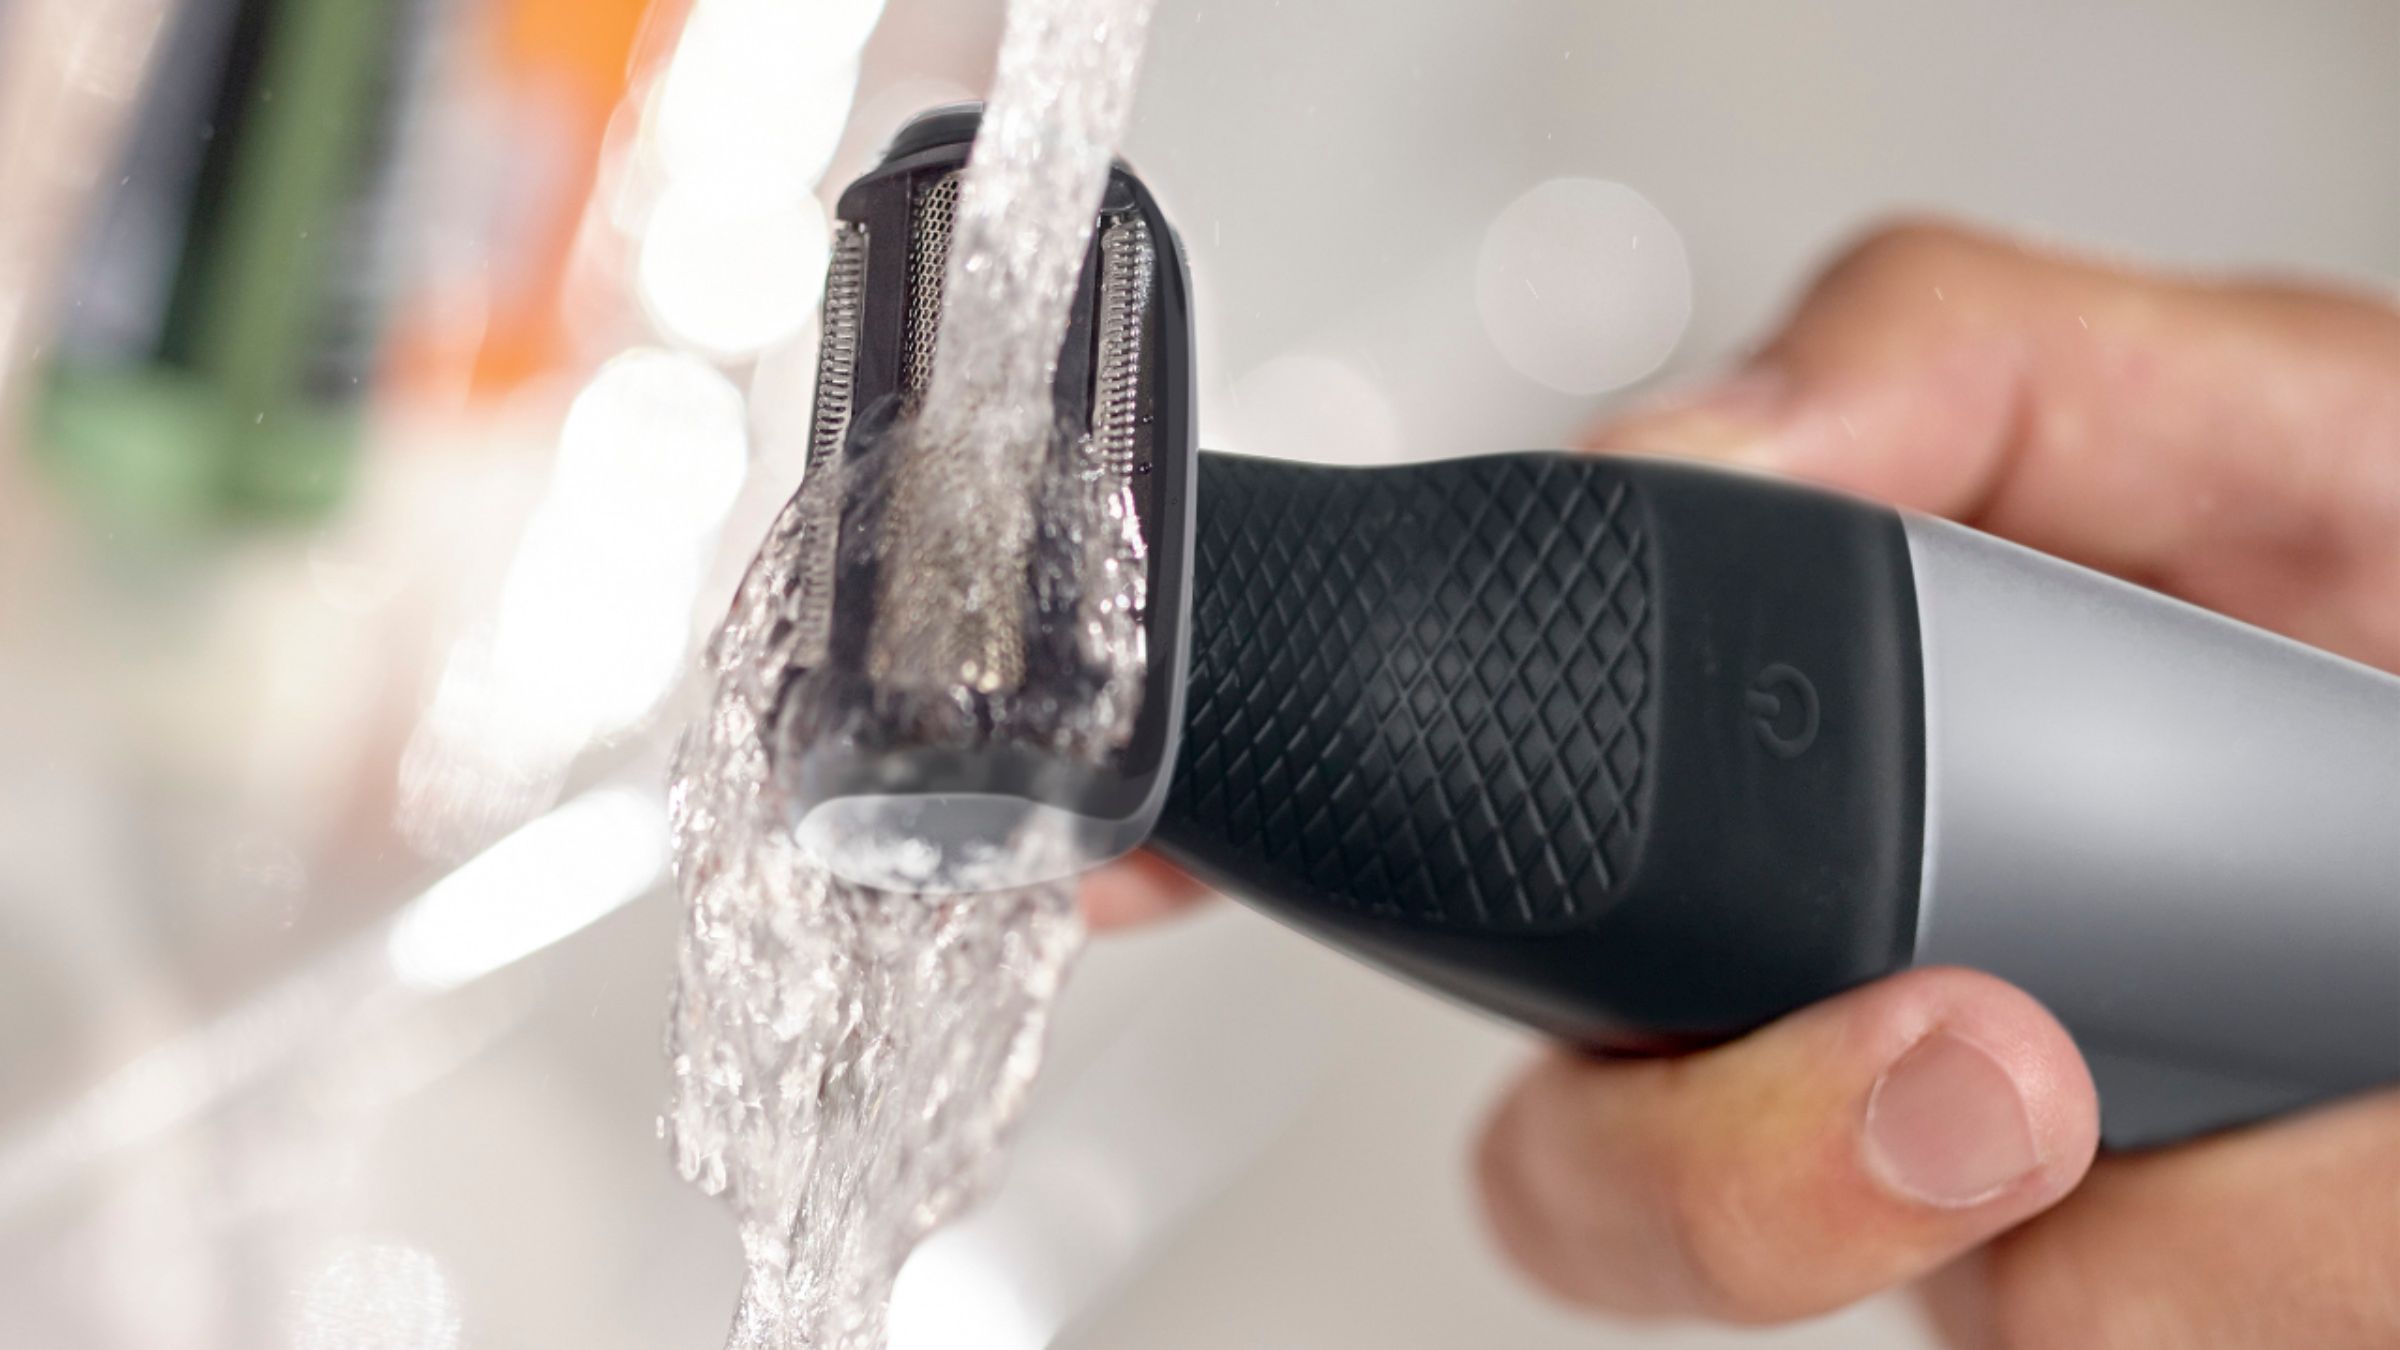 philips norelco bodygroom series 3500 review